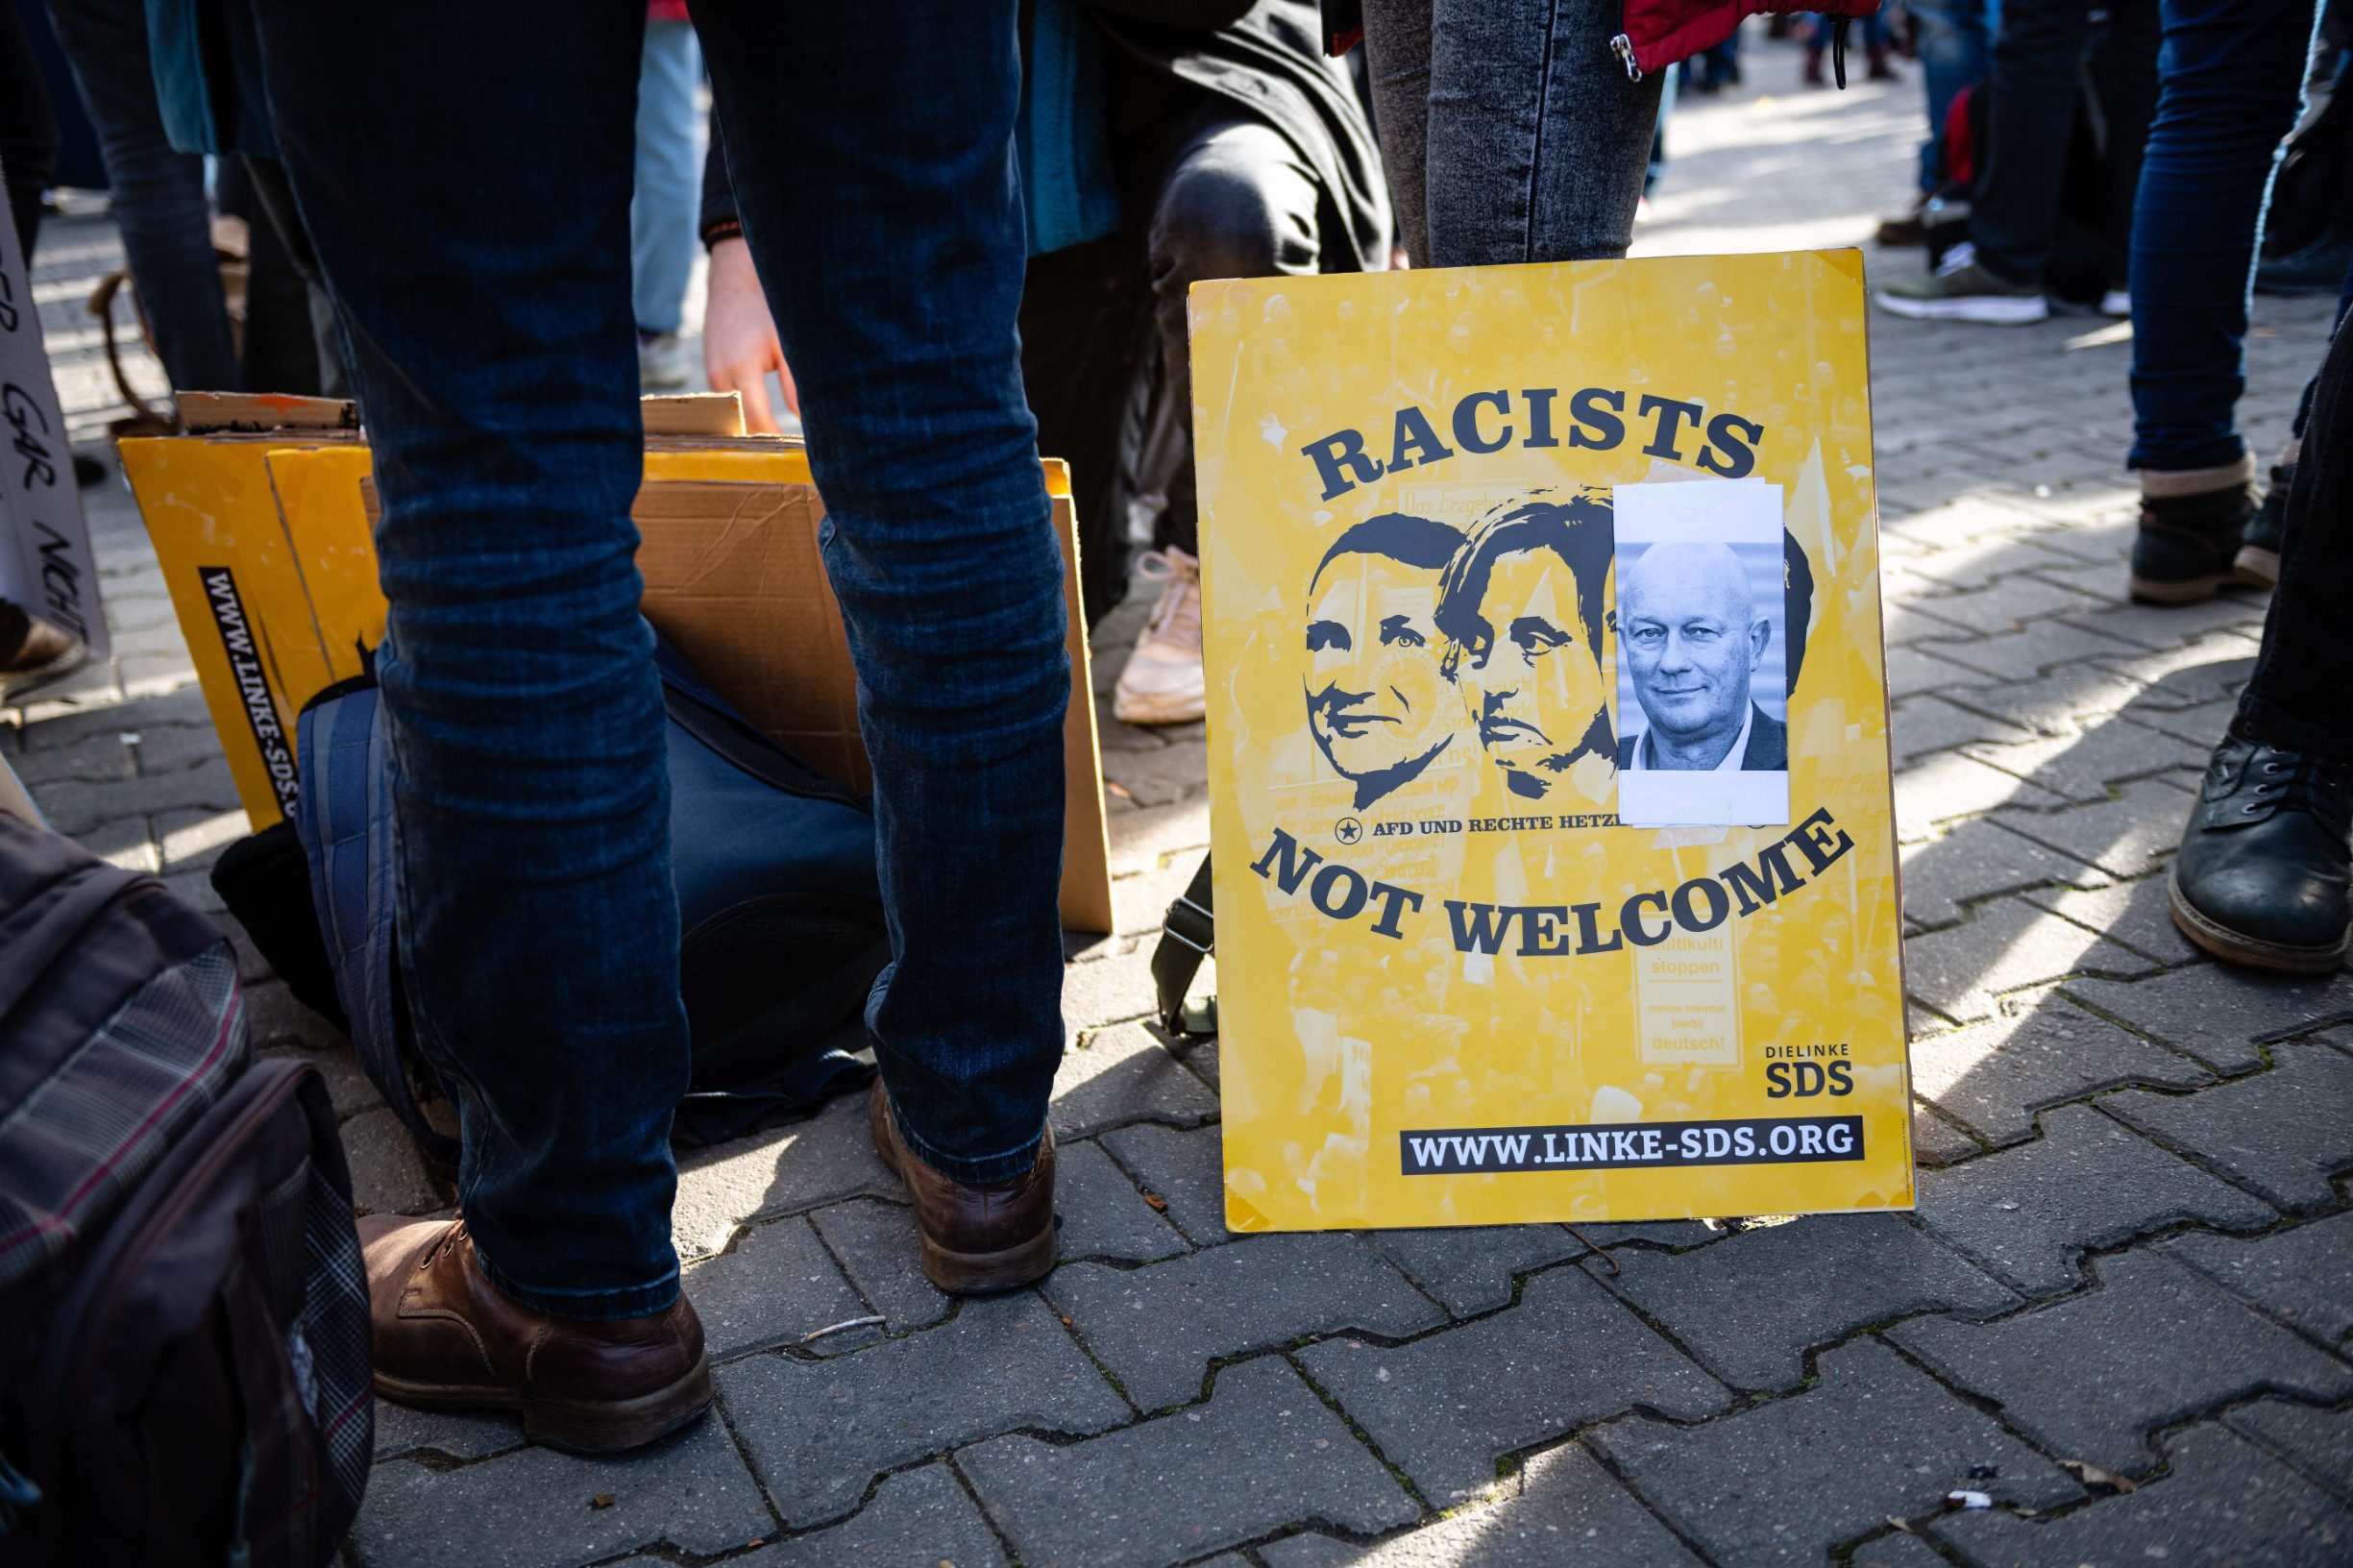 Demonstrators hold a poster showing (L-R) Afd politicians Bjoern Hoecke and Beatrix von Storch and FDP politician Thomas Kemmerich that reads 